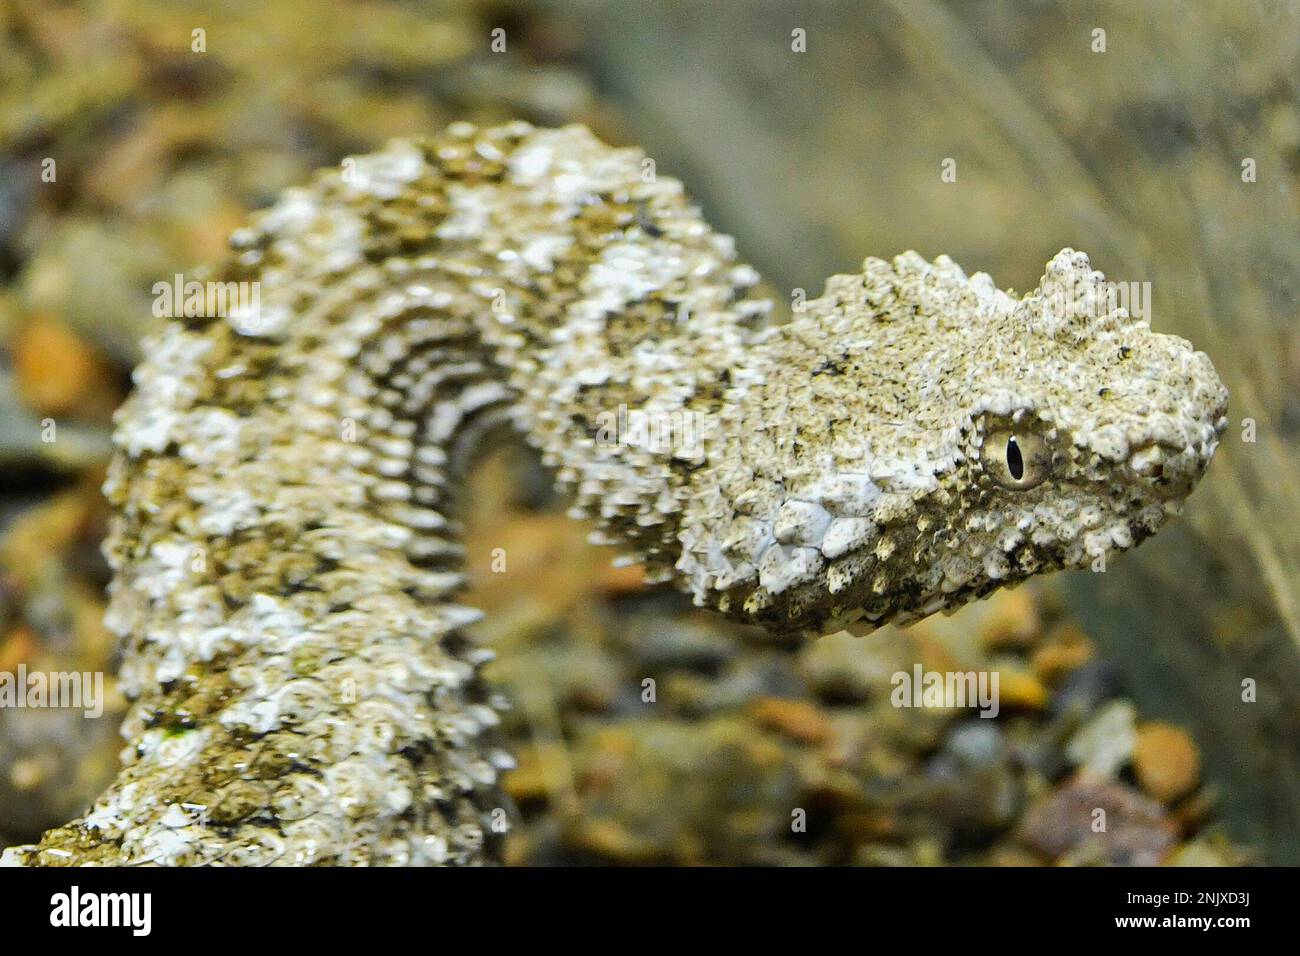 Pilsen, Czech Republic. 23rd Feb, 2023. Rare Spider-tailed Horned Viper  (Pseudocerastes urarachnoides) from Iran in Pilsen Zoo, Czech Republic,  February 23, 2023. The special formation at the end of the tail serves